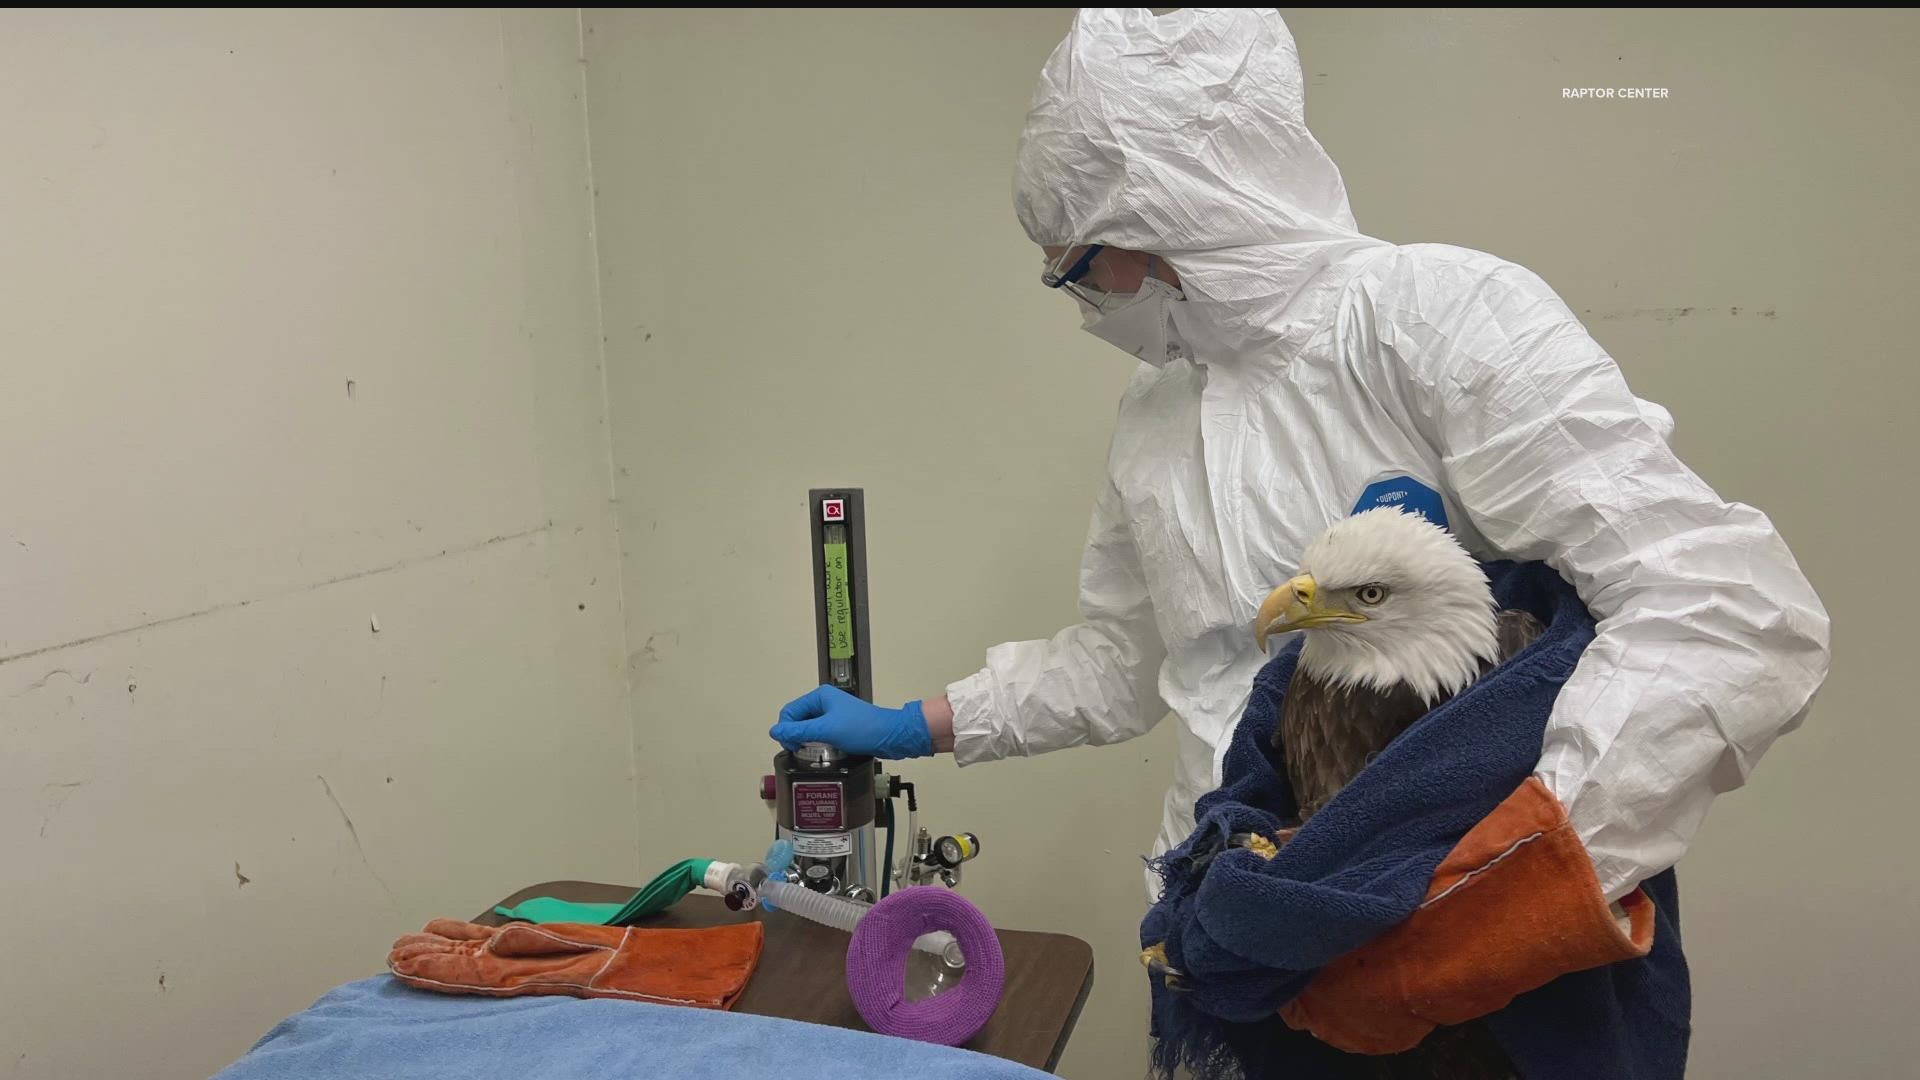 Since setting up a new triage area last week, The Raptor Center has tested 11 birds, seven of which were positive for a highly contagious strain of avian flu.